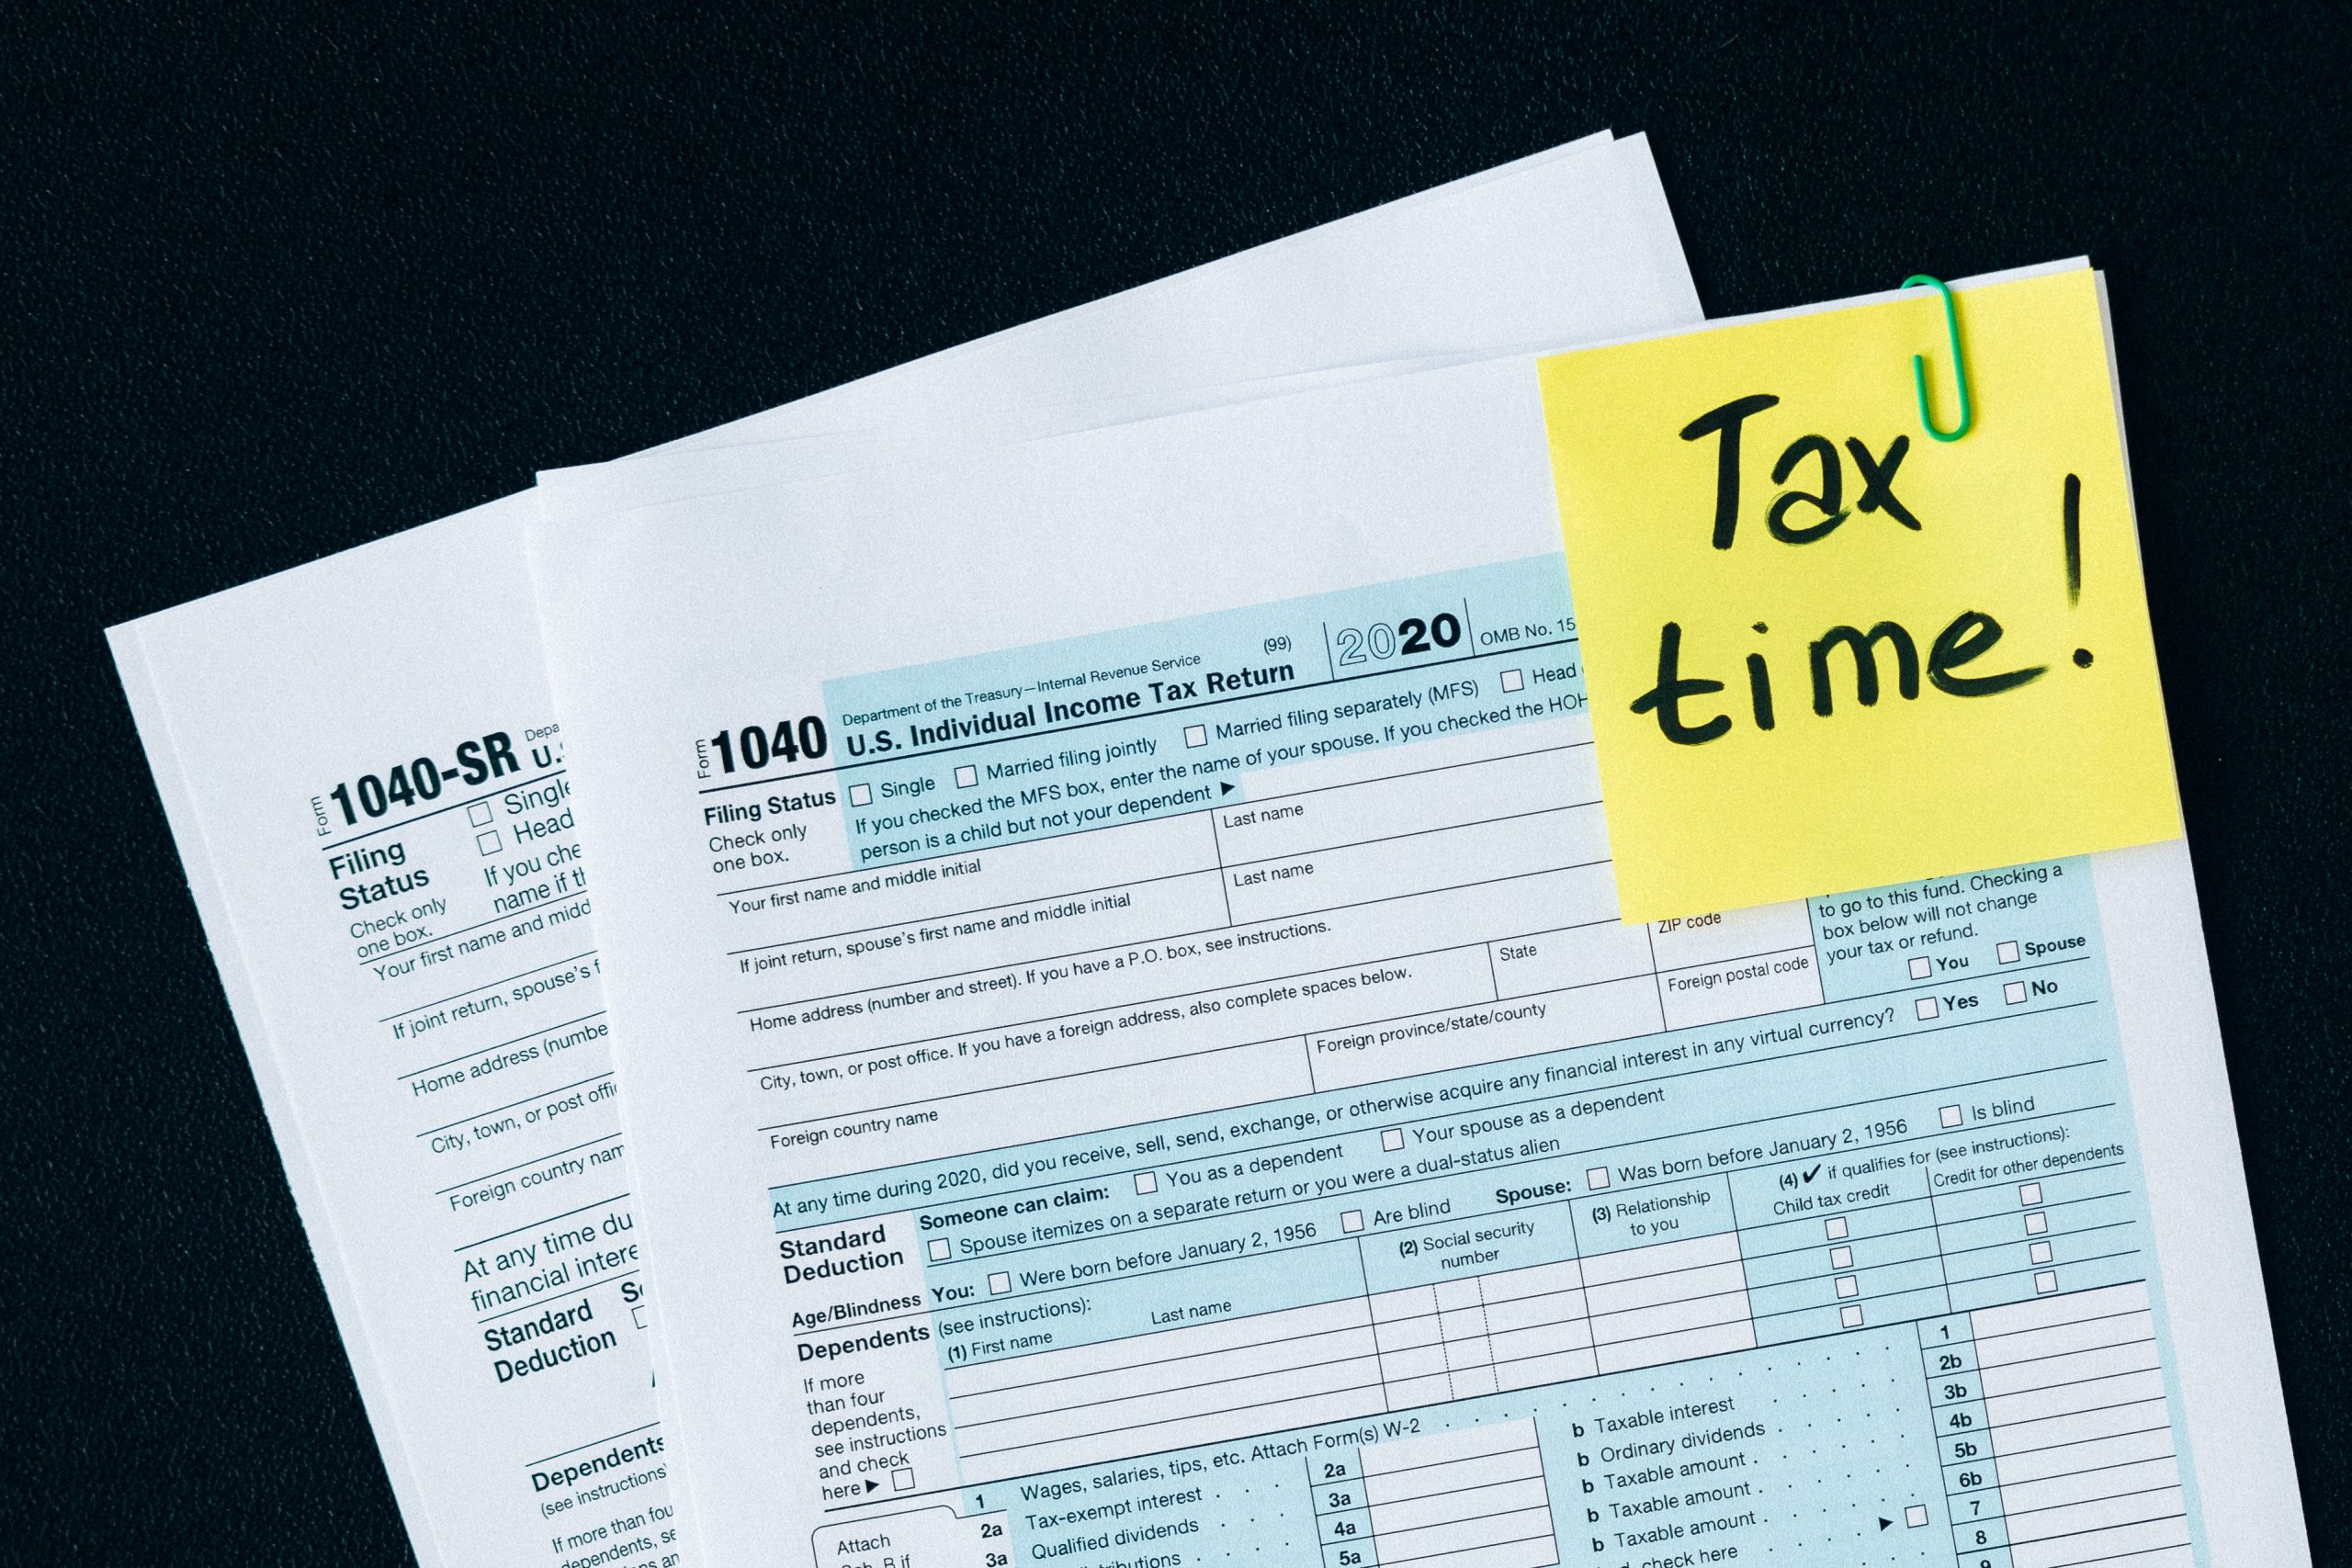 Is tax preparation considered financial services